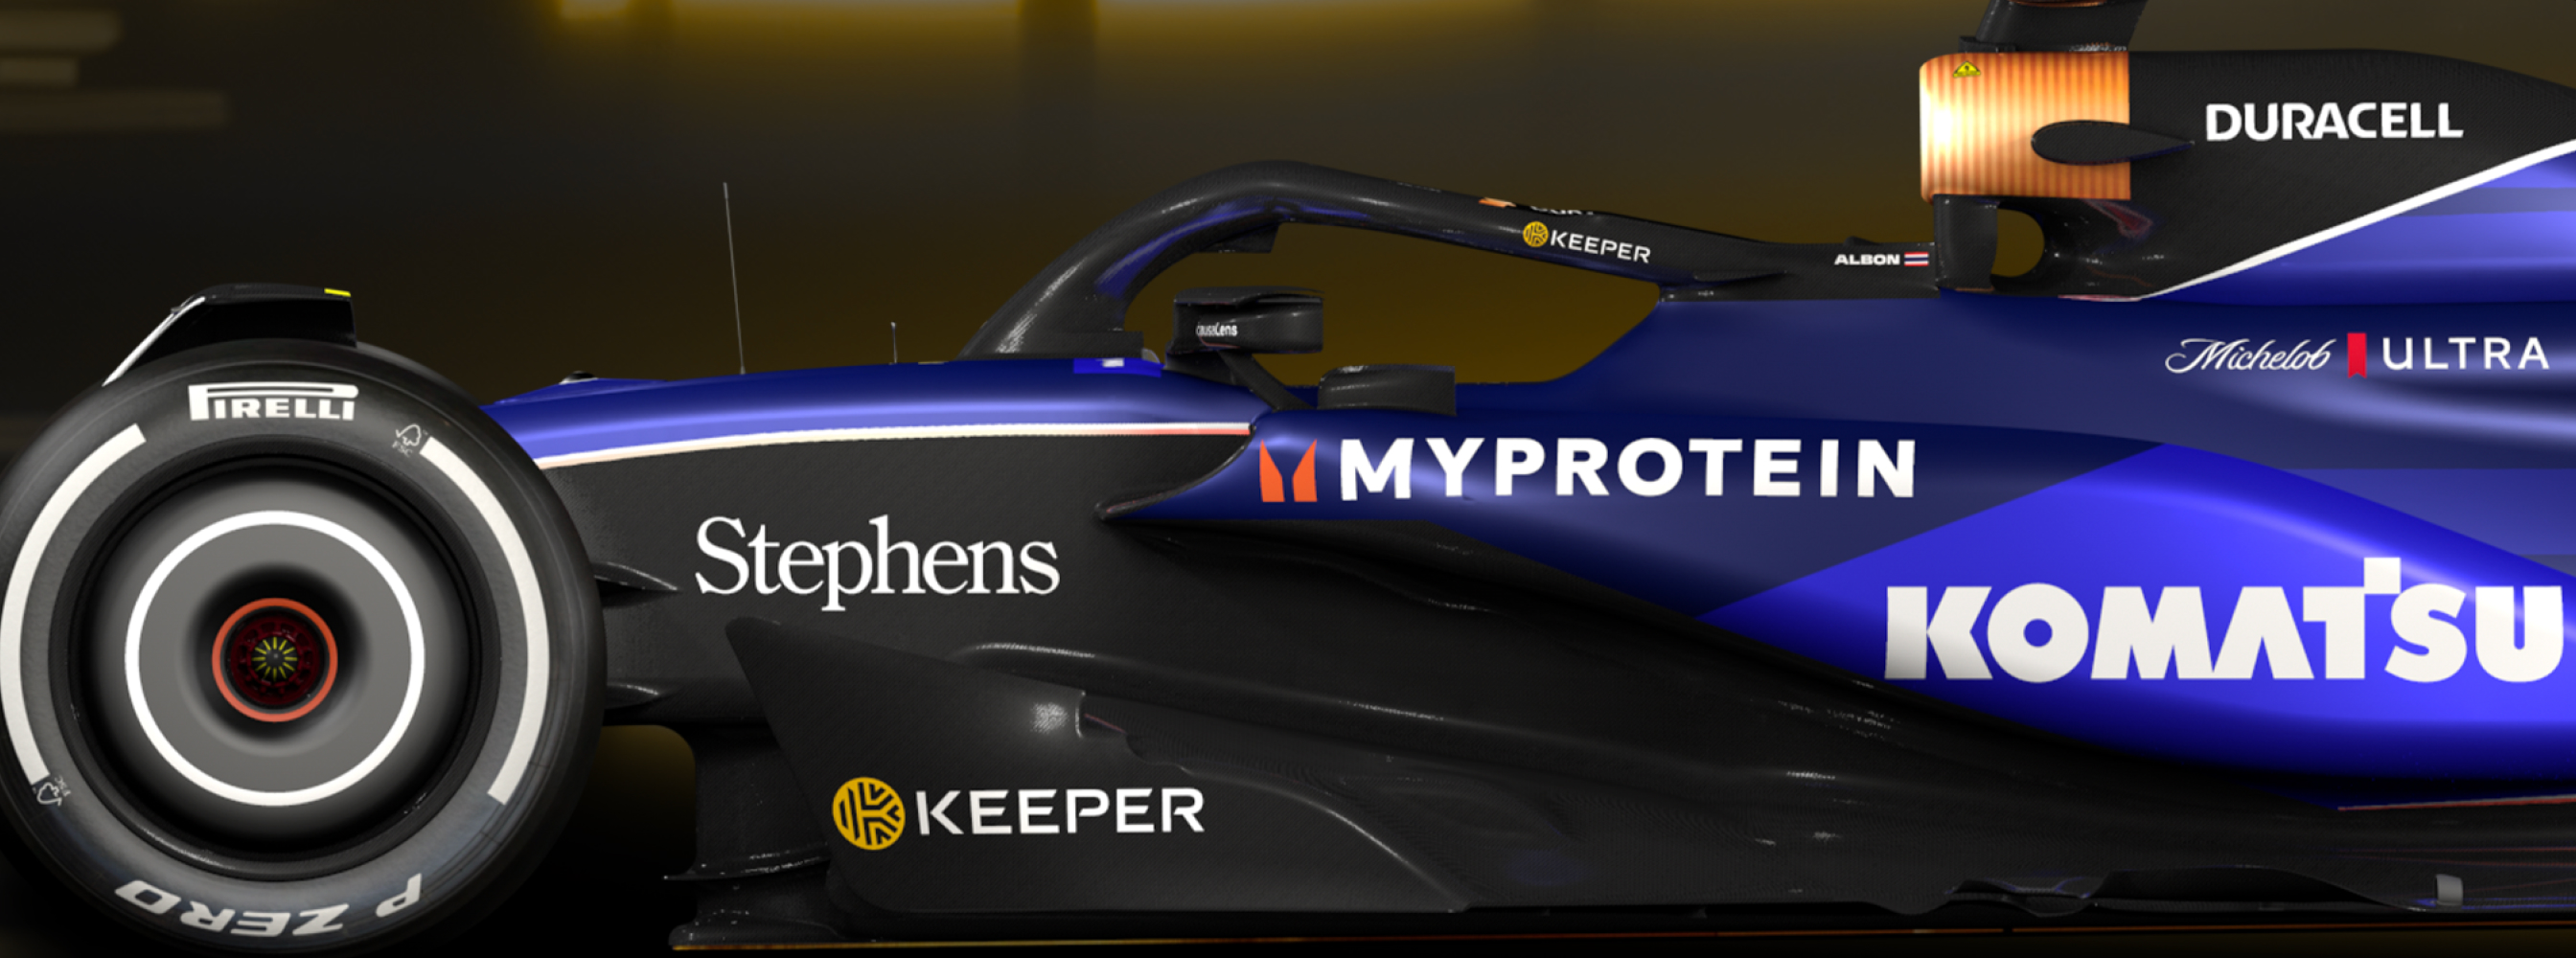 Keeper x Williams Racing - Innover plus rapidement